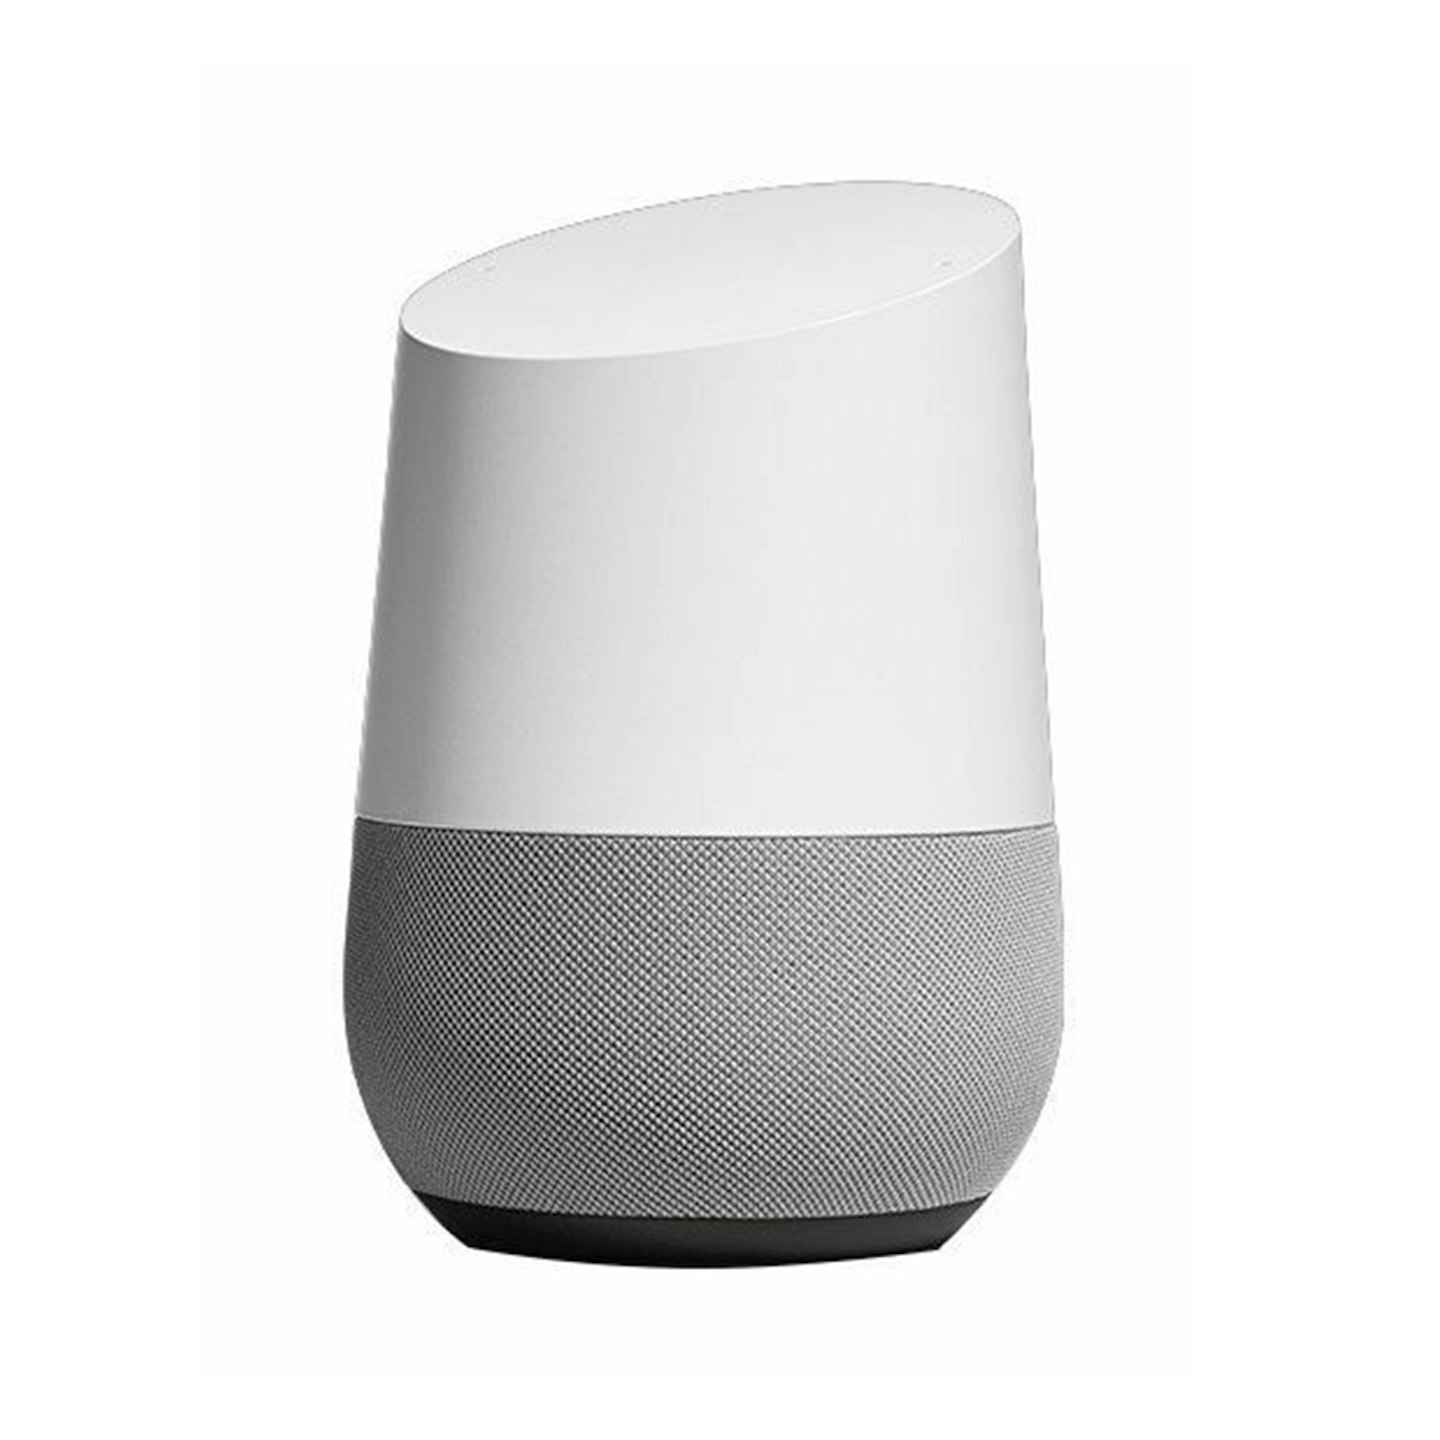 Google Home Hands-Free Voice Commands Assistant Smart Speaker - White